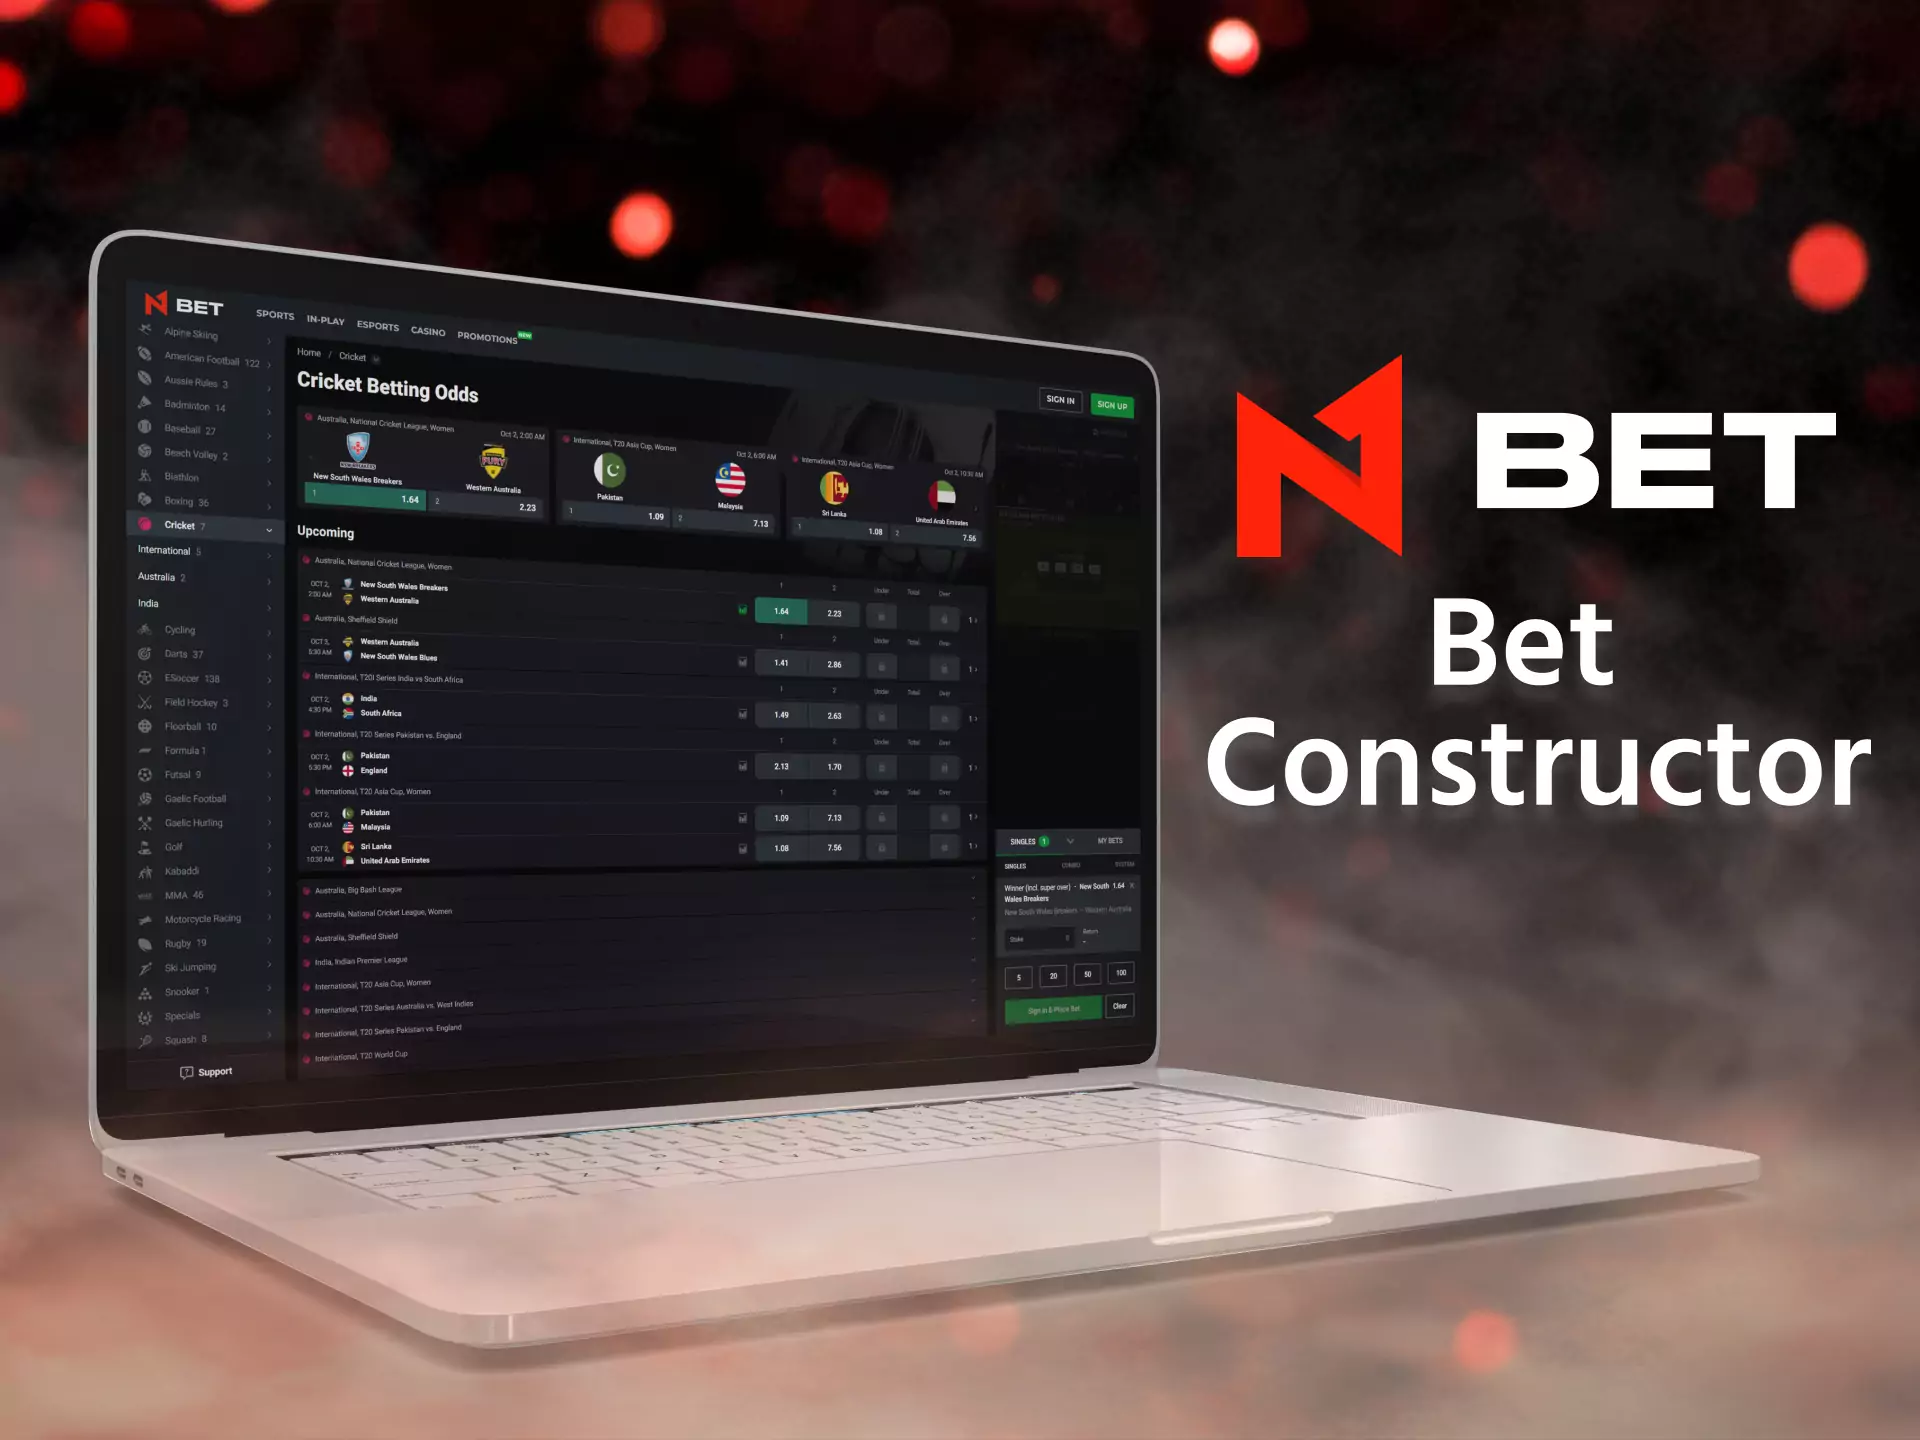 Use the bet constructor from N1Bet.